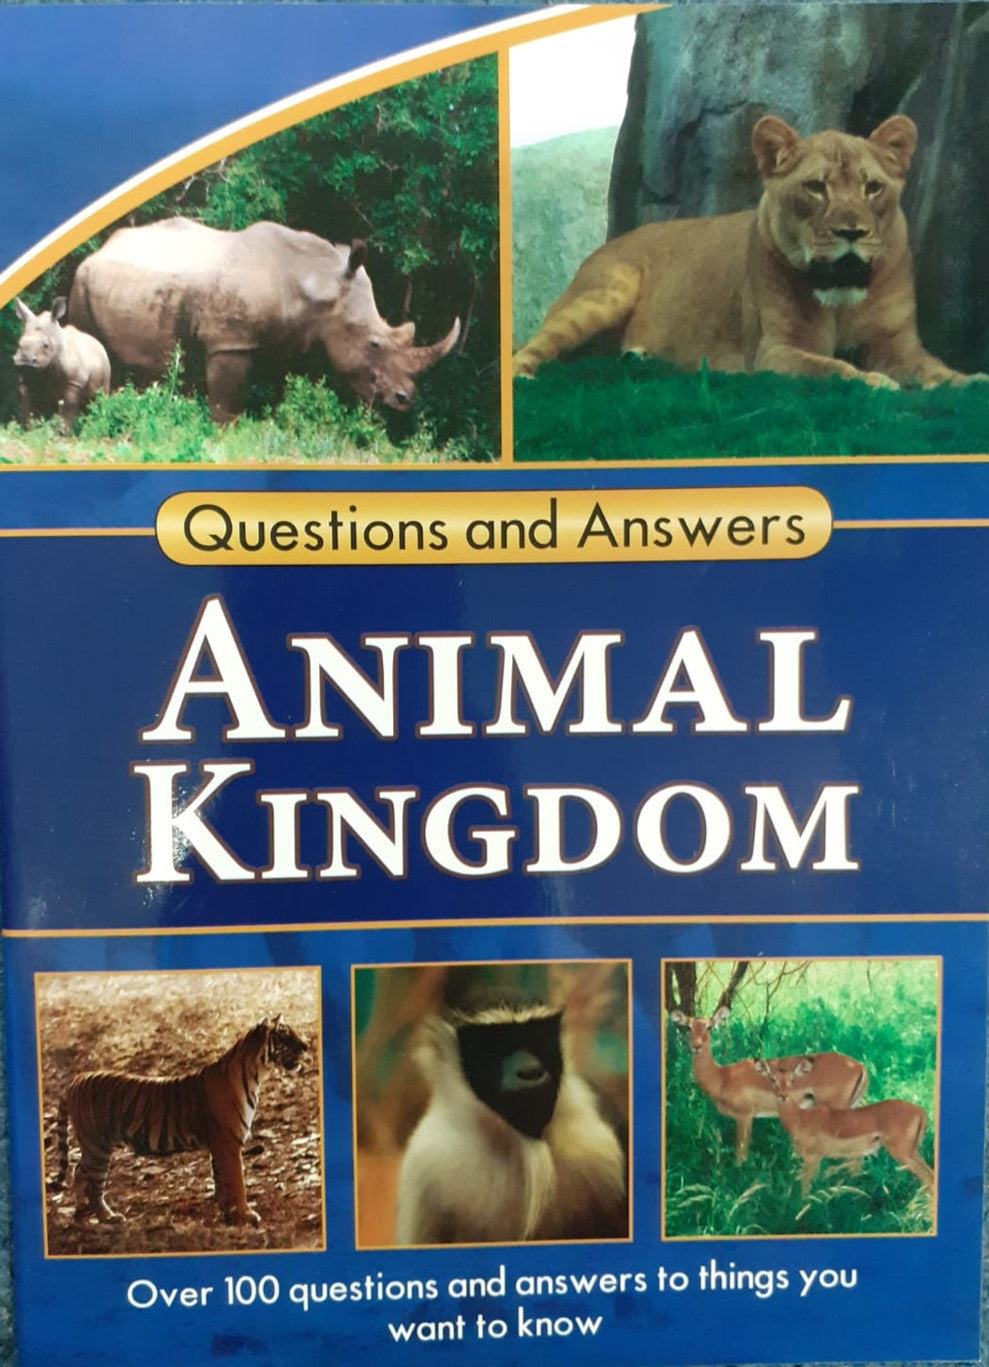 QUESTIONS AND ANSWERS - ANIMAL KINGDOM